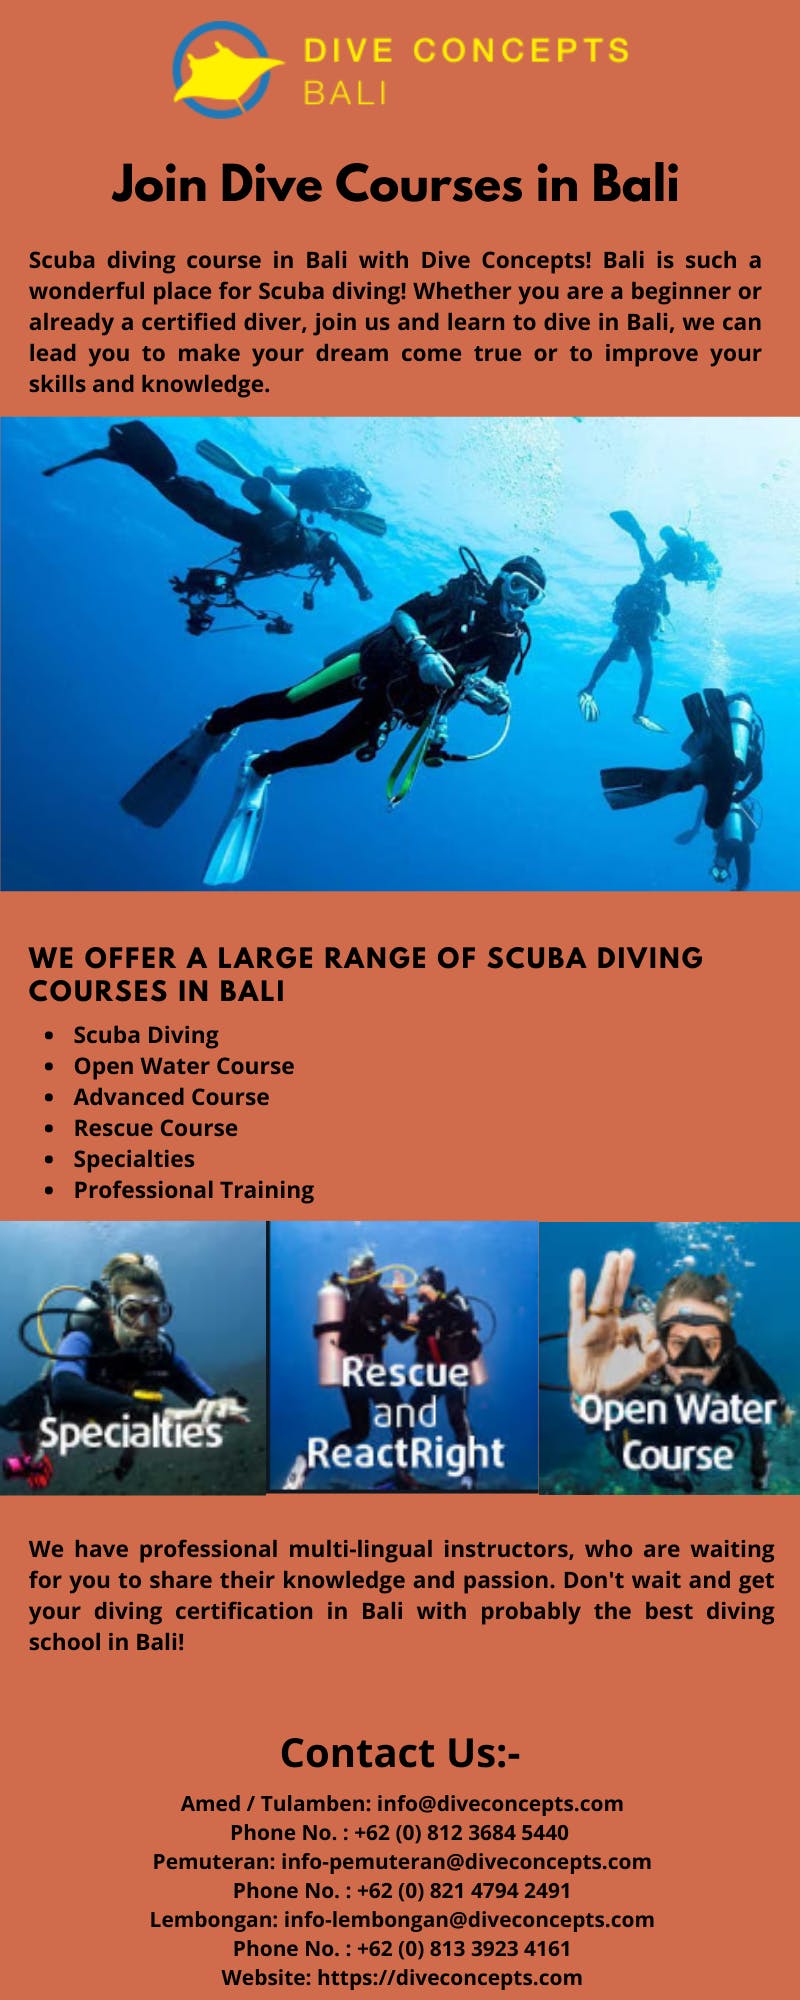 Join Dive Courses _in Bali - Dive Concepts.png